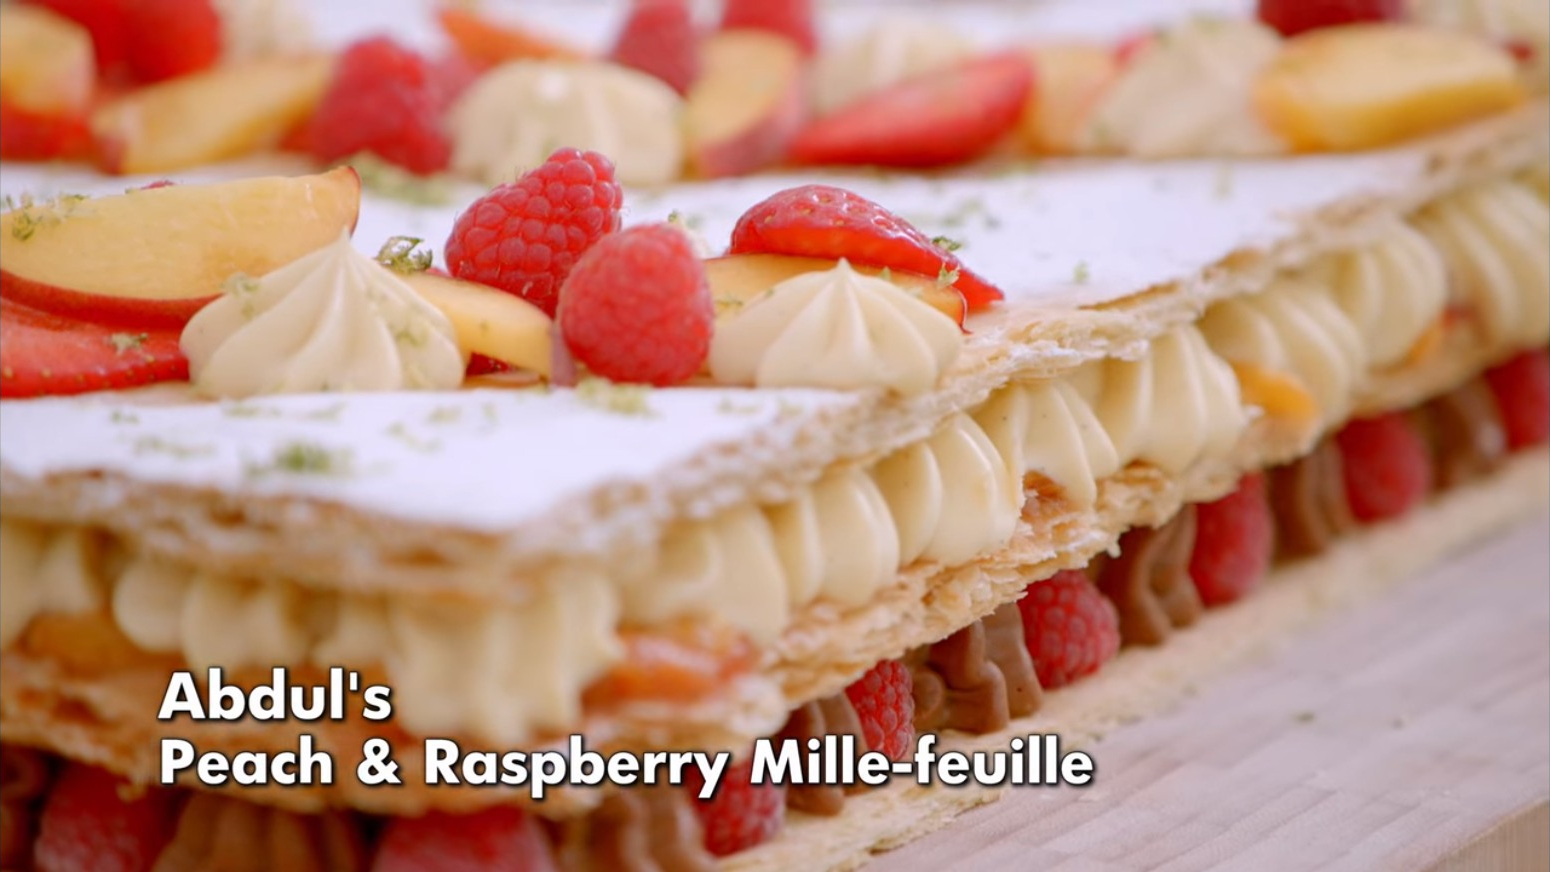 Picture shows: Abdul's Peach & Raspberry Mille-feuille Showstopper from The Great British Baking Show's Custard Week